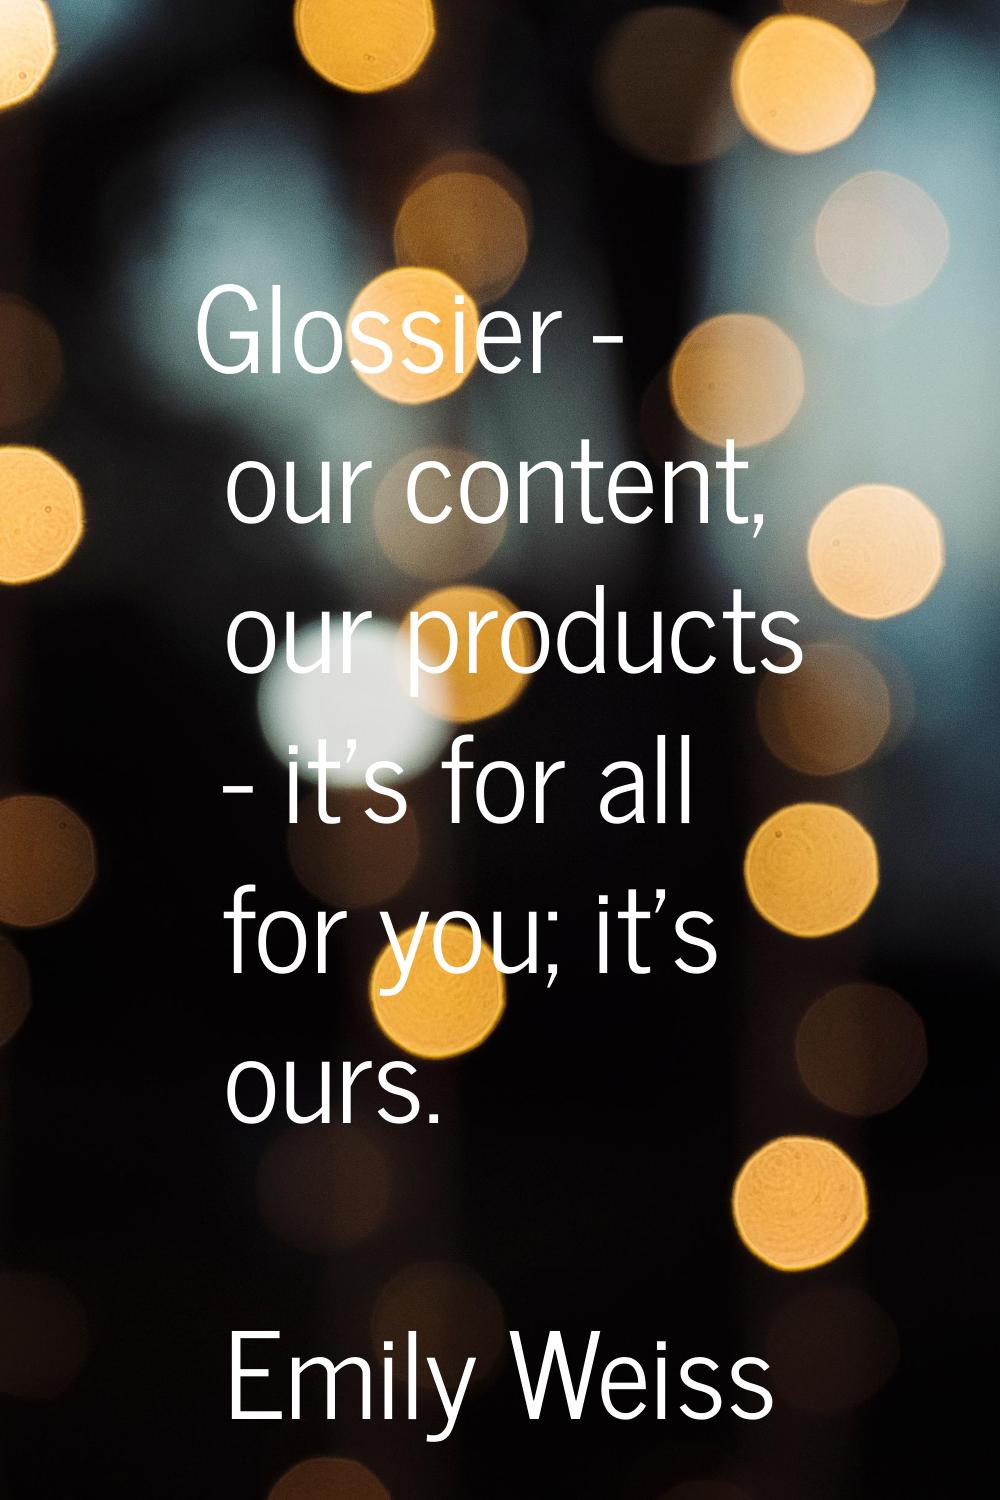 Glossier - our content, our products - it's for all for you; it's ours.